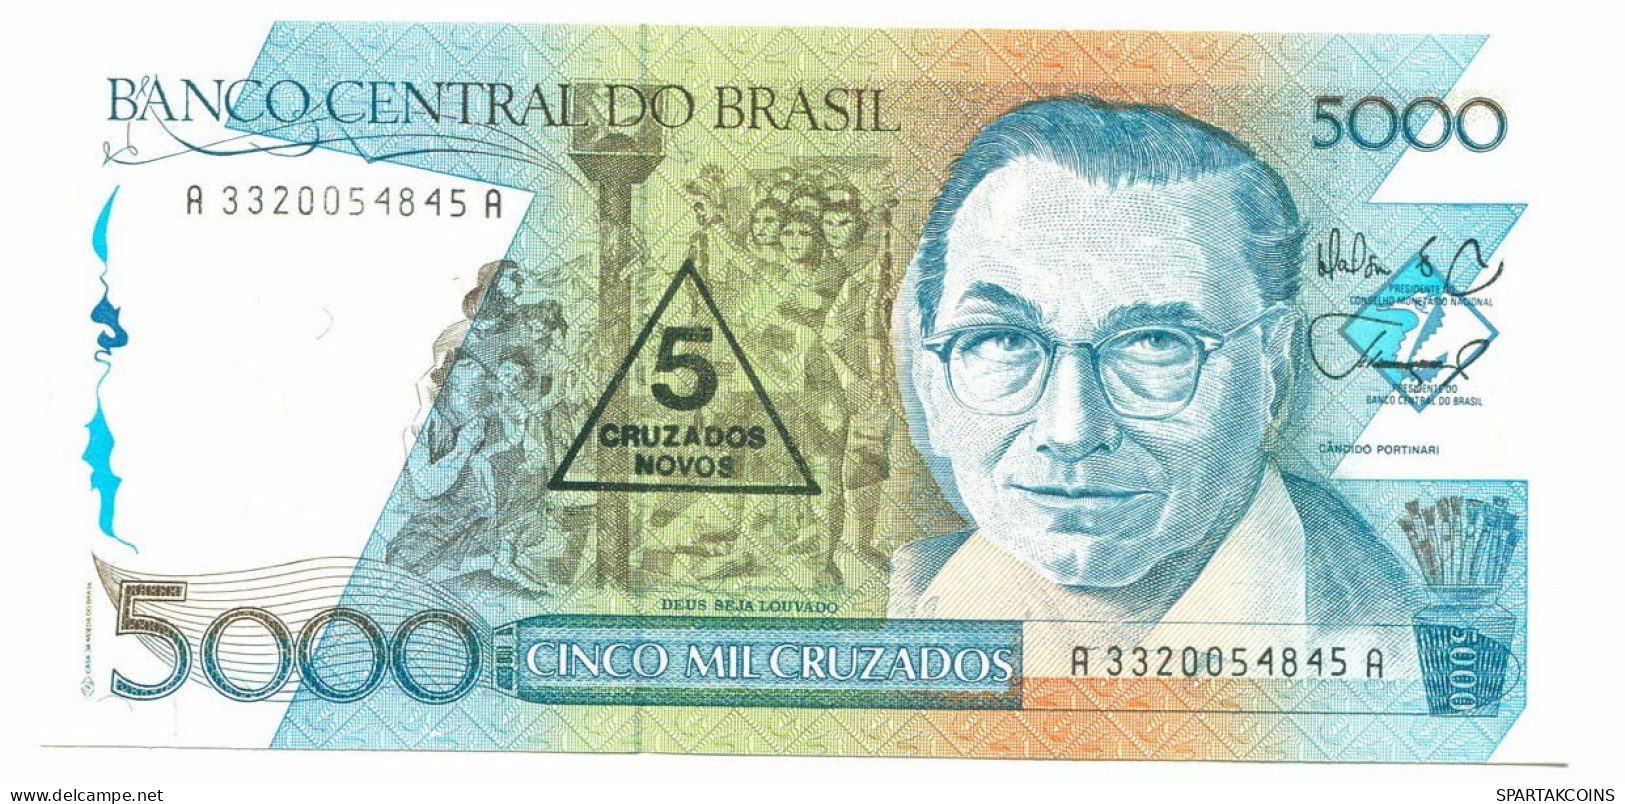 BRASIL 5000 CRUZADOS 1988 UNC Paper Money Banknote #P10880.4 - [11] Local Banknote Issues